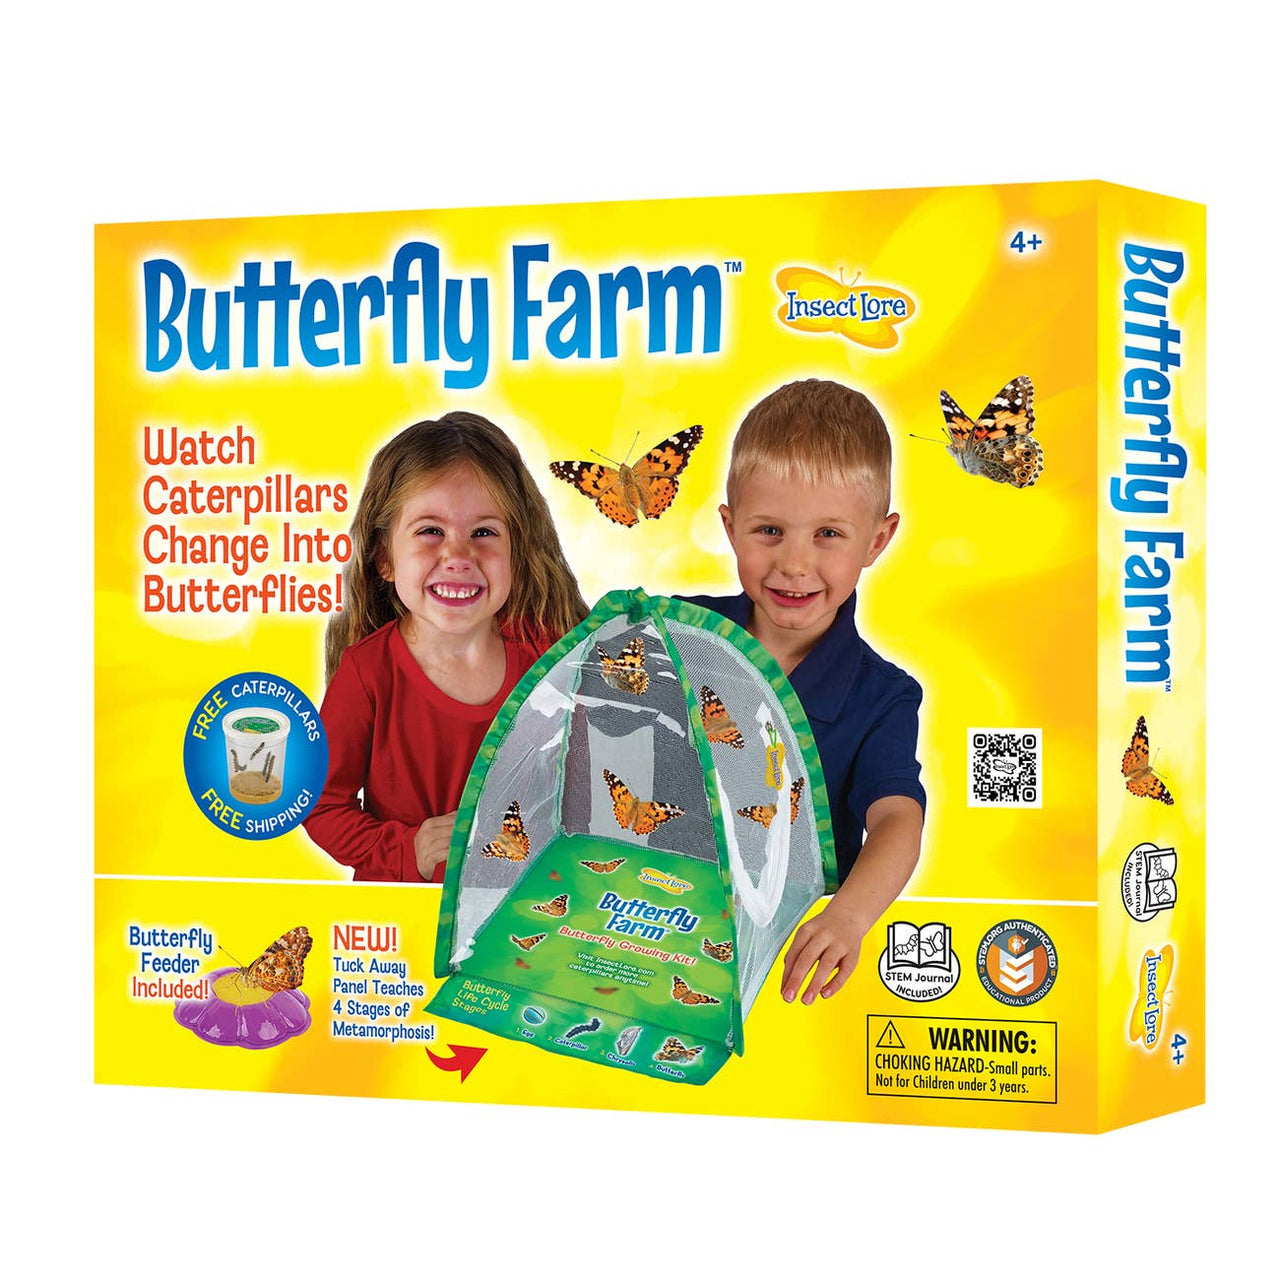 Insect Lore Butterfly Farm w/ Prepaid Voucher